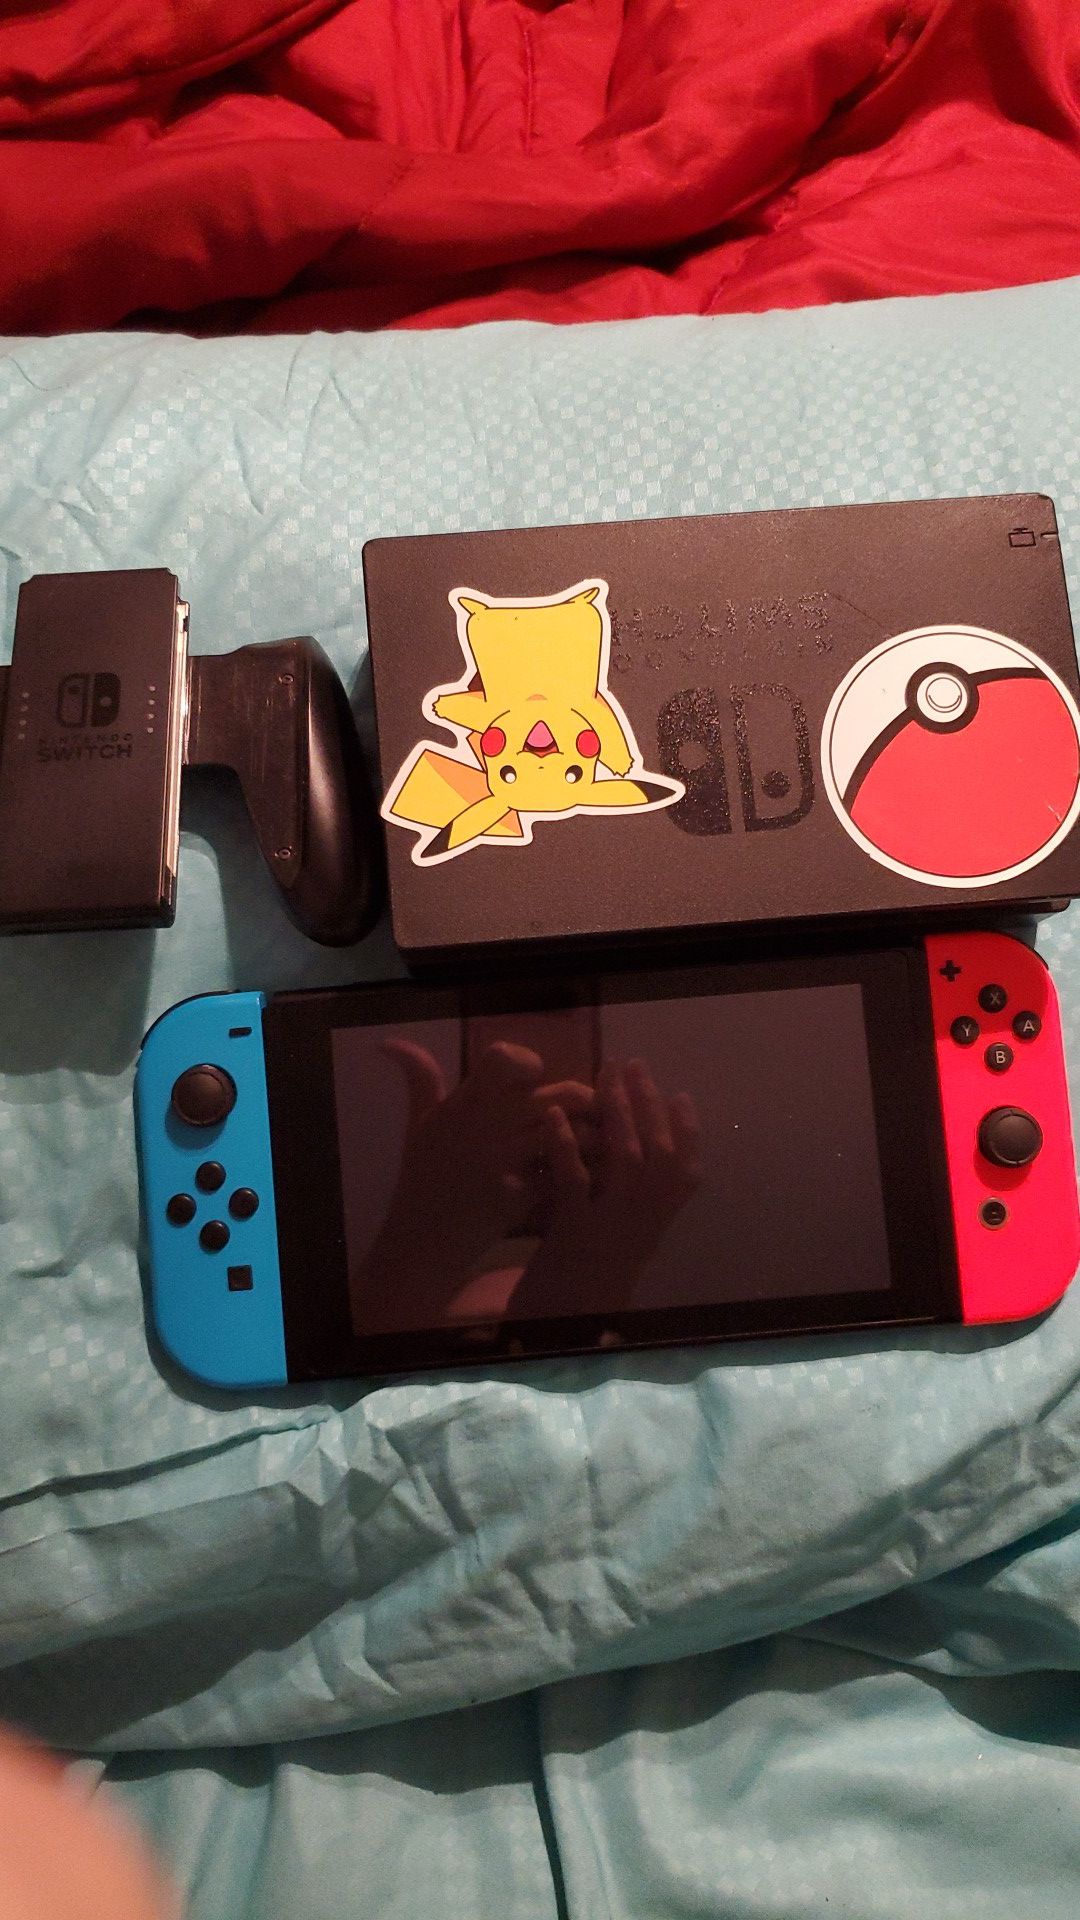 Nintendo switch with neon blue and red joy con